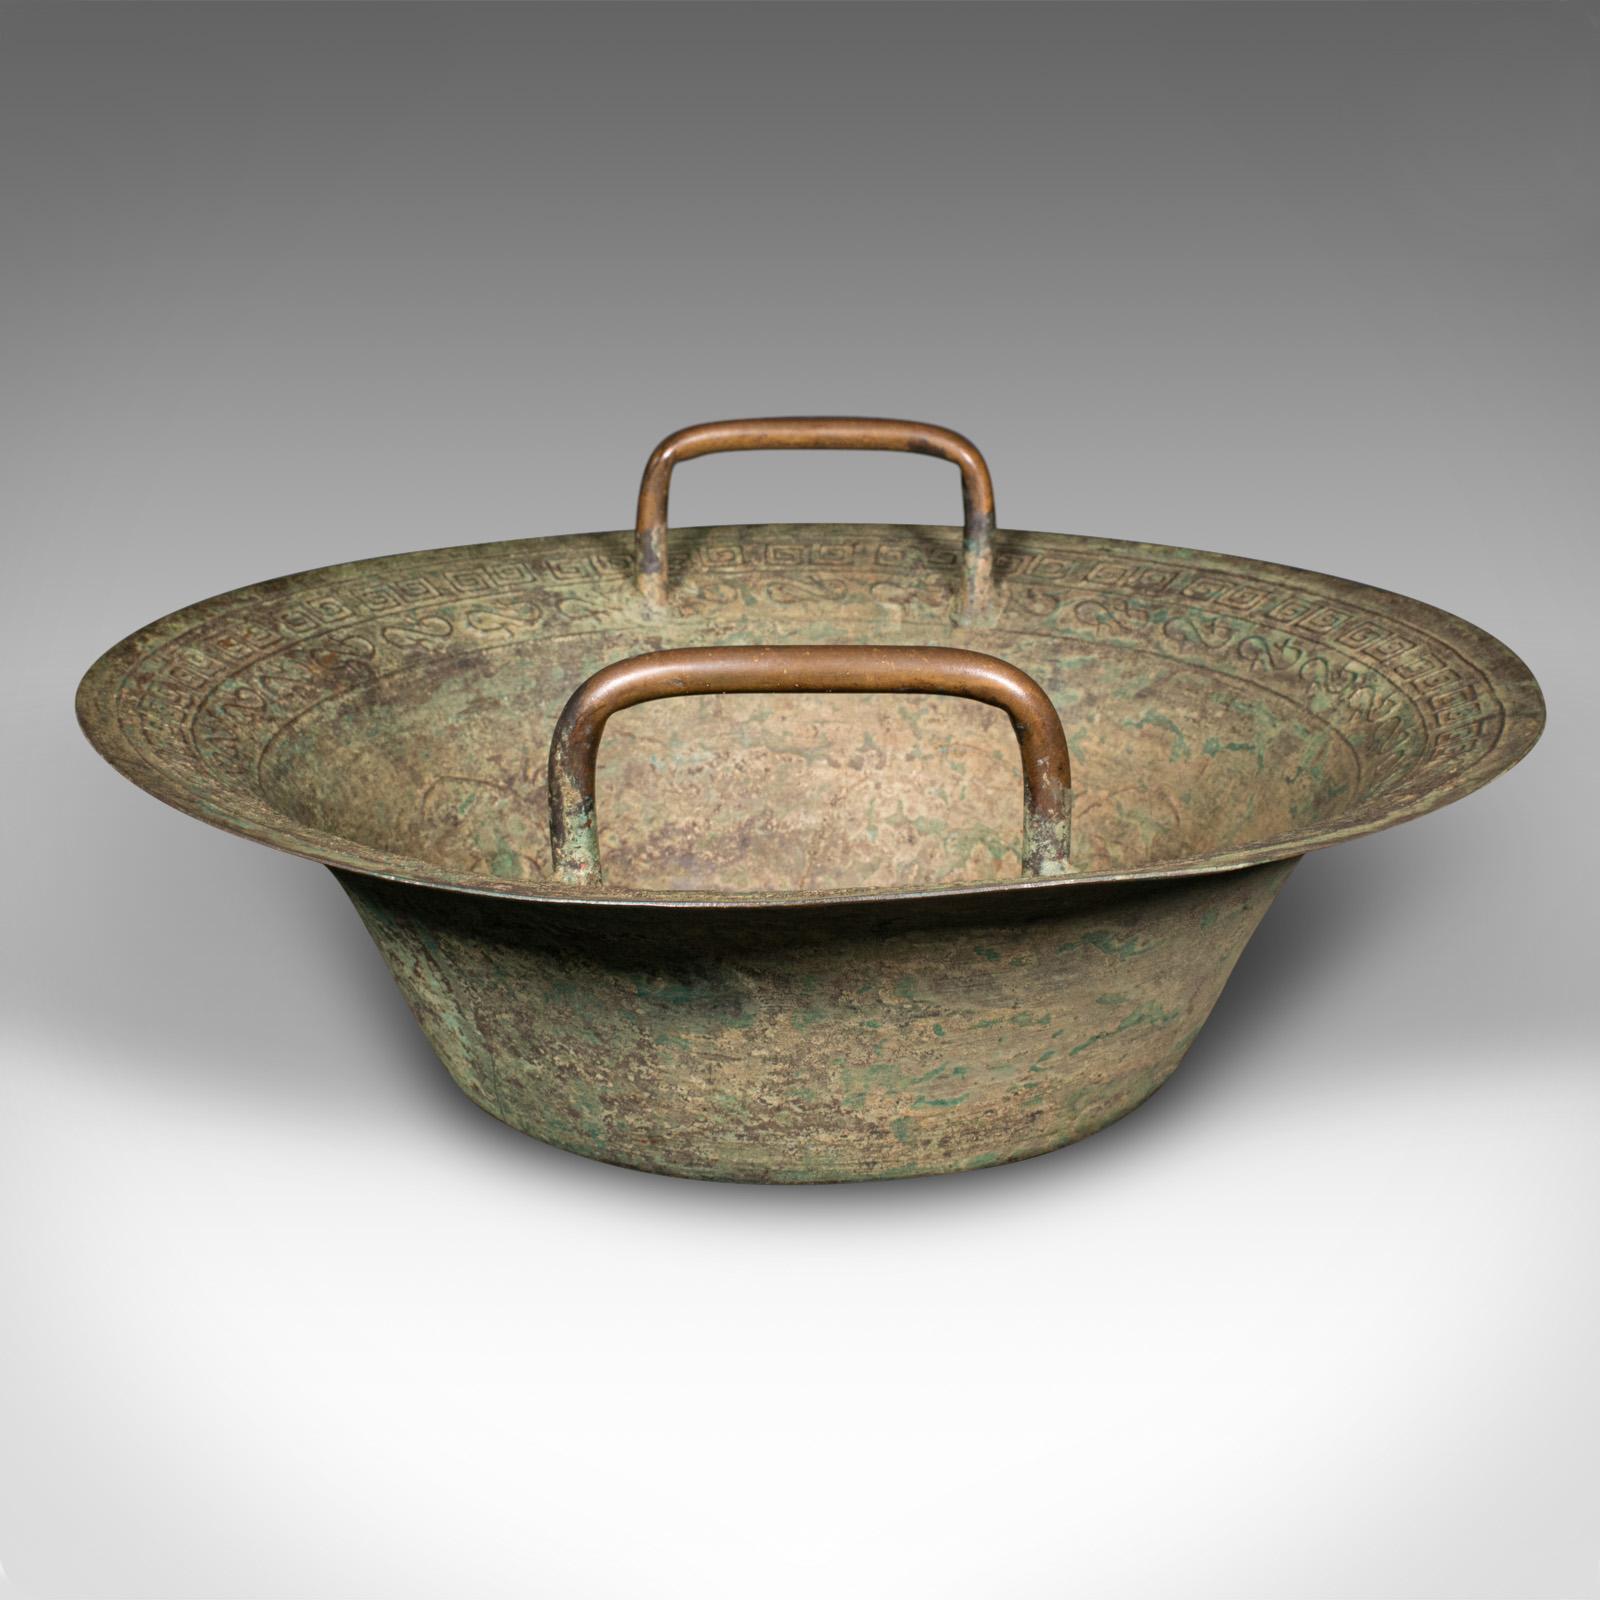 Rustic Antique Ceremonial Bowl, Chinese, Patinated Brass, Dish, Qing, Victorian, C.1900 For Sale